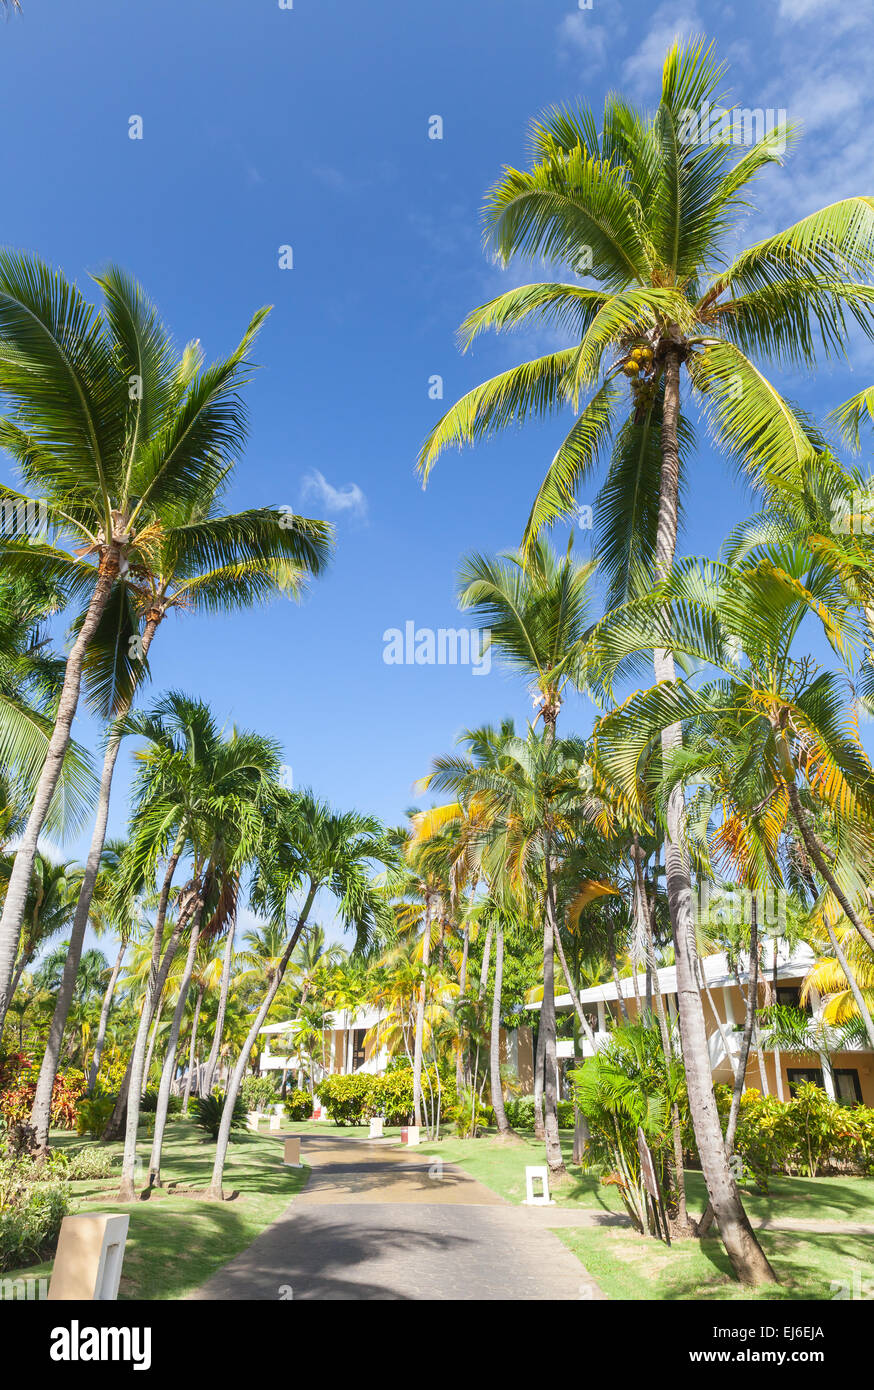 Park with lane with coconut palm trees in Dominican republic Stock Photo